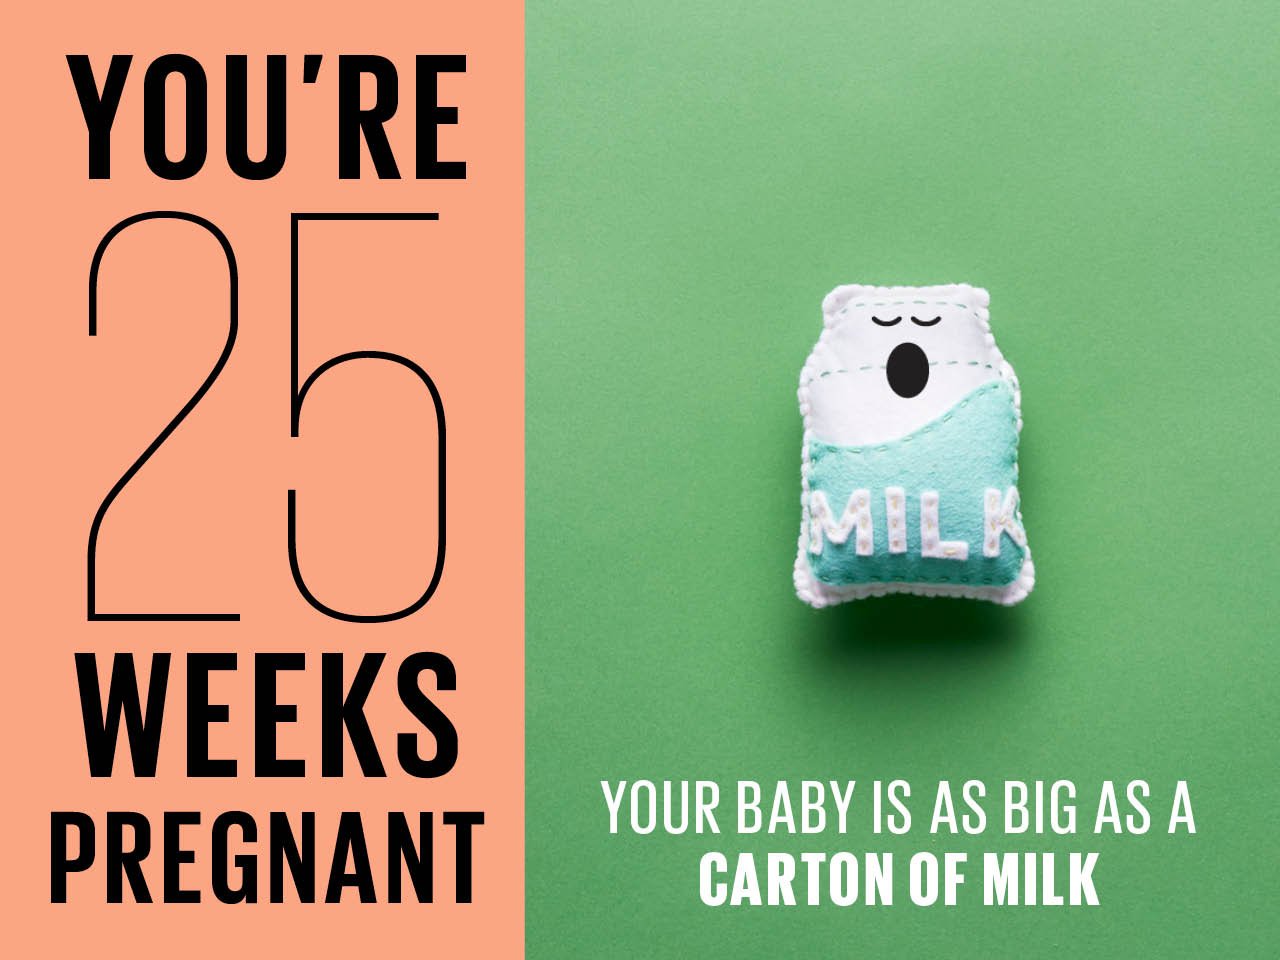 Felt carton of milk used to show how big baby is at 25 weeks pregnant